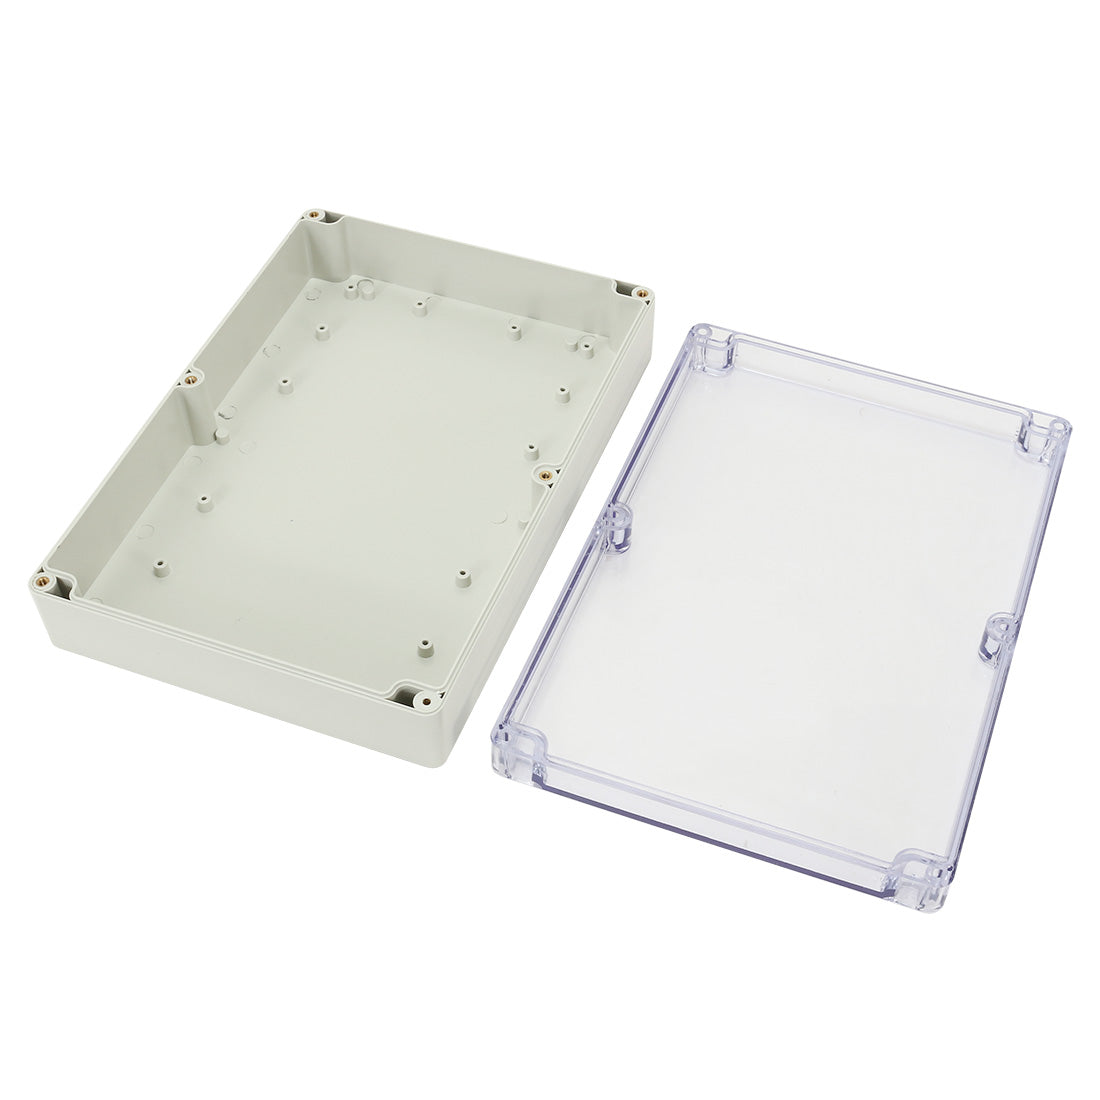 uxcell Uxcell 10.4"x7.2"x2.4"(263mmx182mmx60mm) ABS Junction Box Electric Project Enclosure Clear